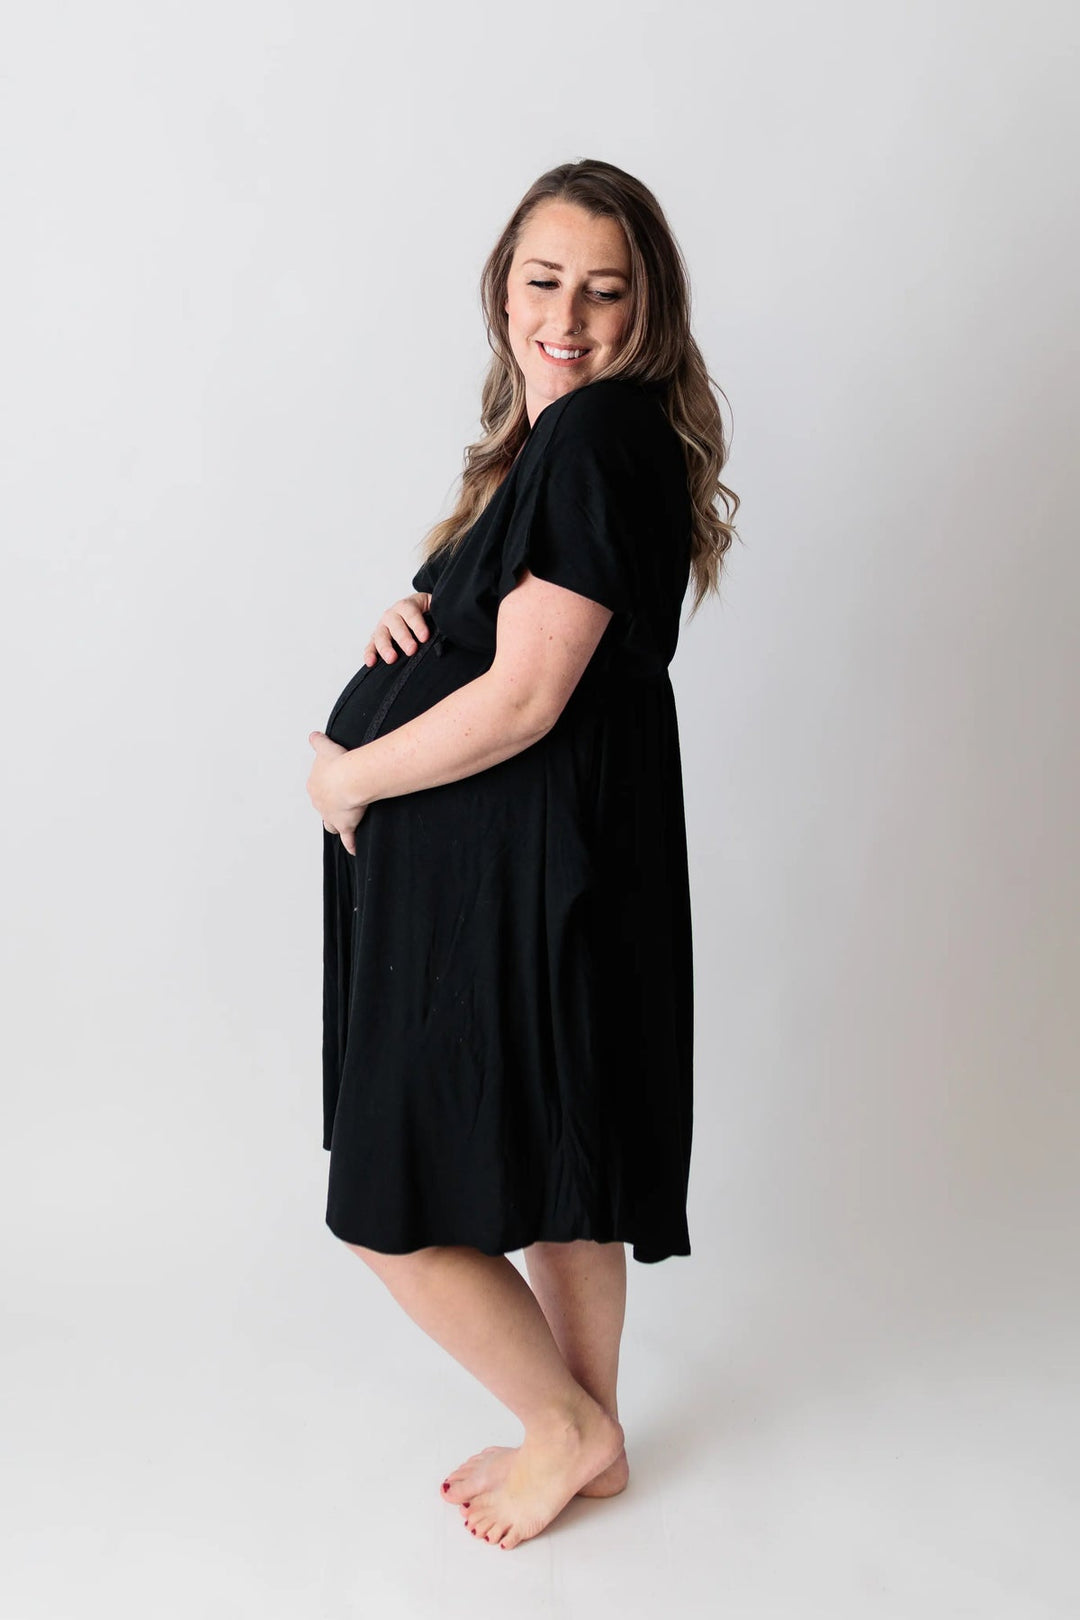 Mother's Day Gift Guide for Expecting Moms in Prince George: Local Services and Products to Pamper and Support the Mom-to-Be